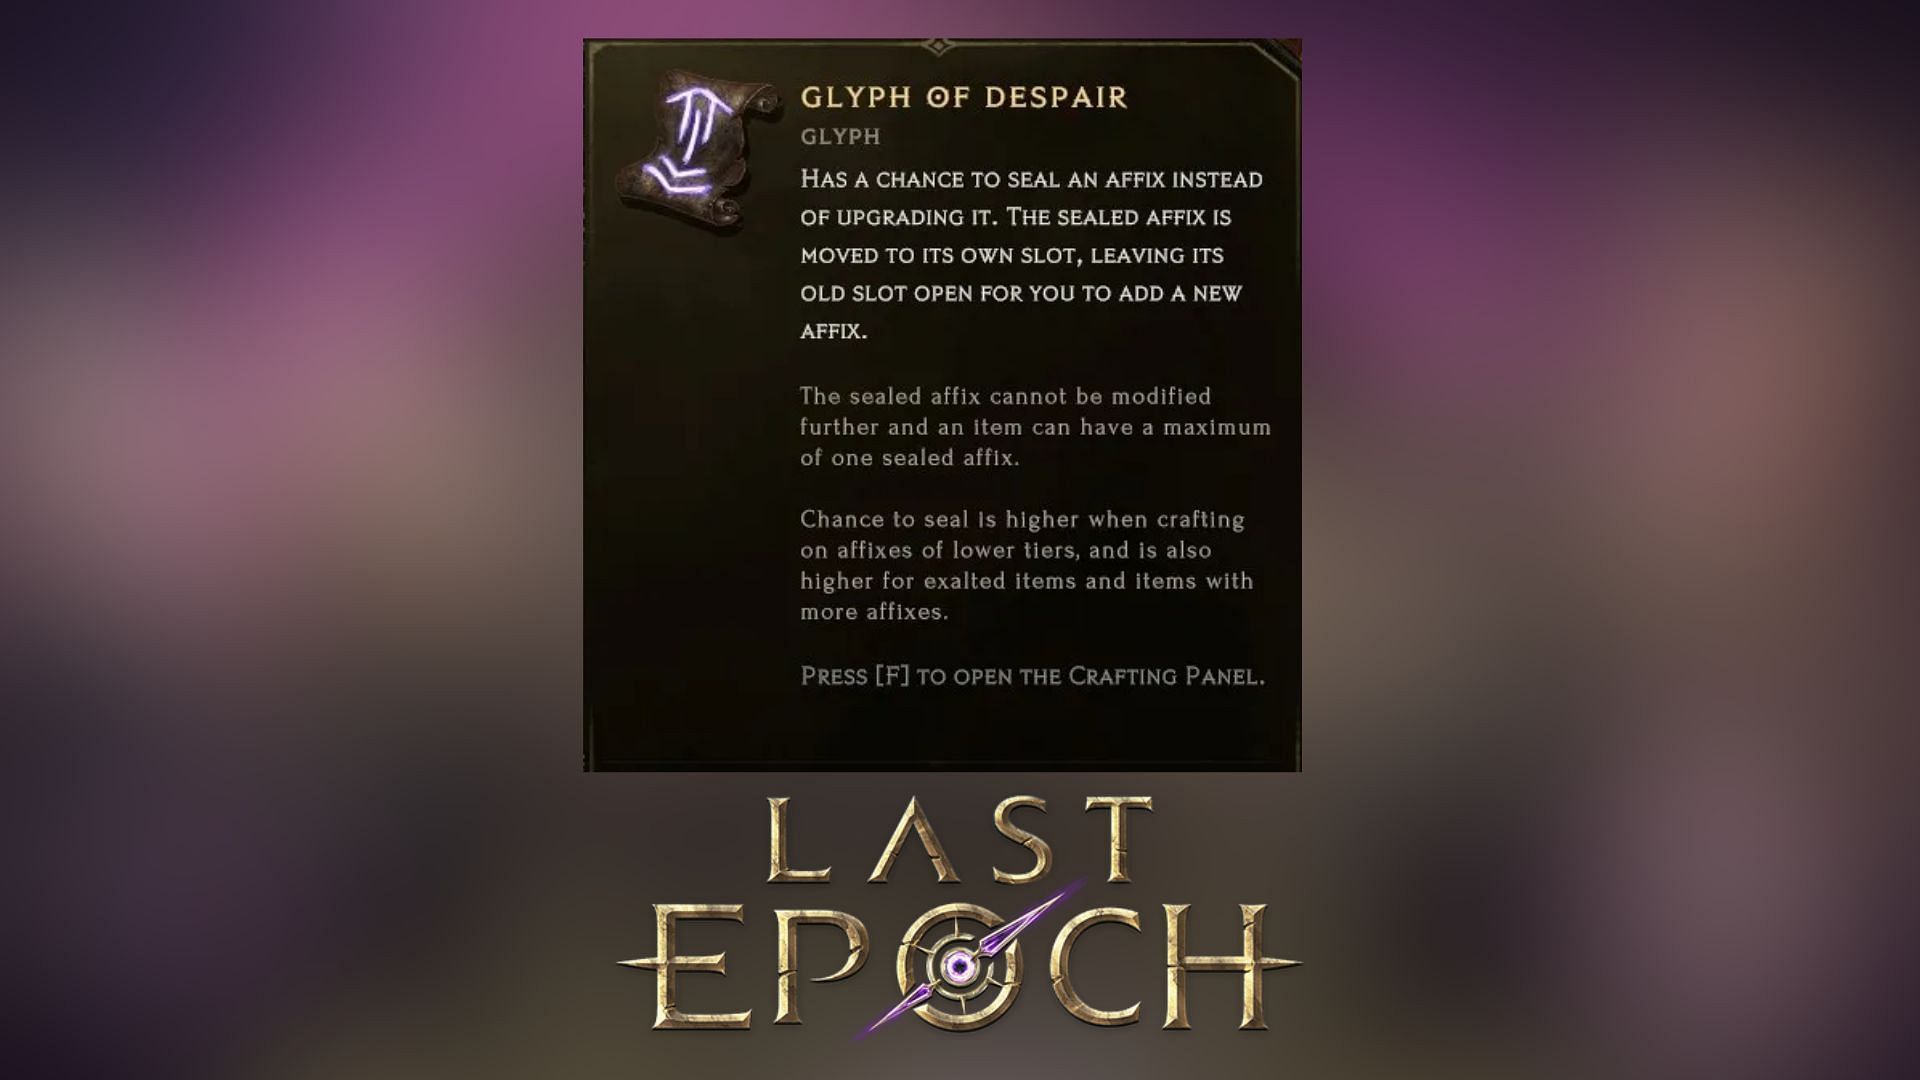 Glyph of Despair fixes affixes to an item (Image via Eleventh Hour Games)